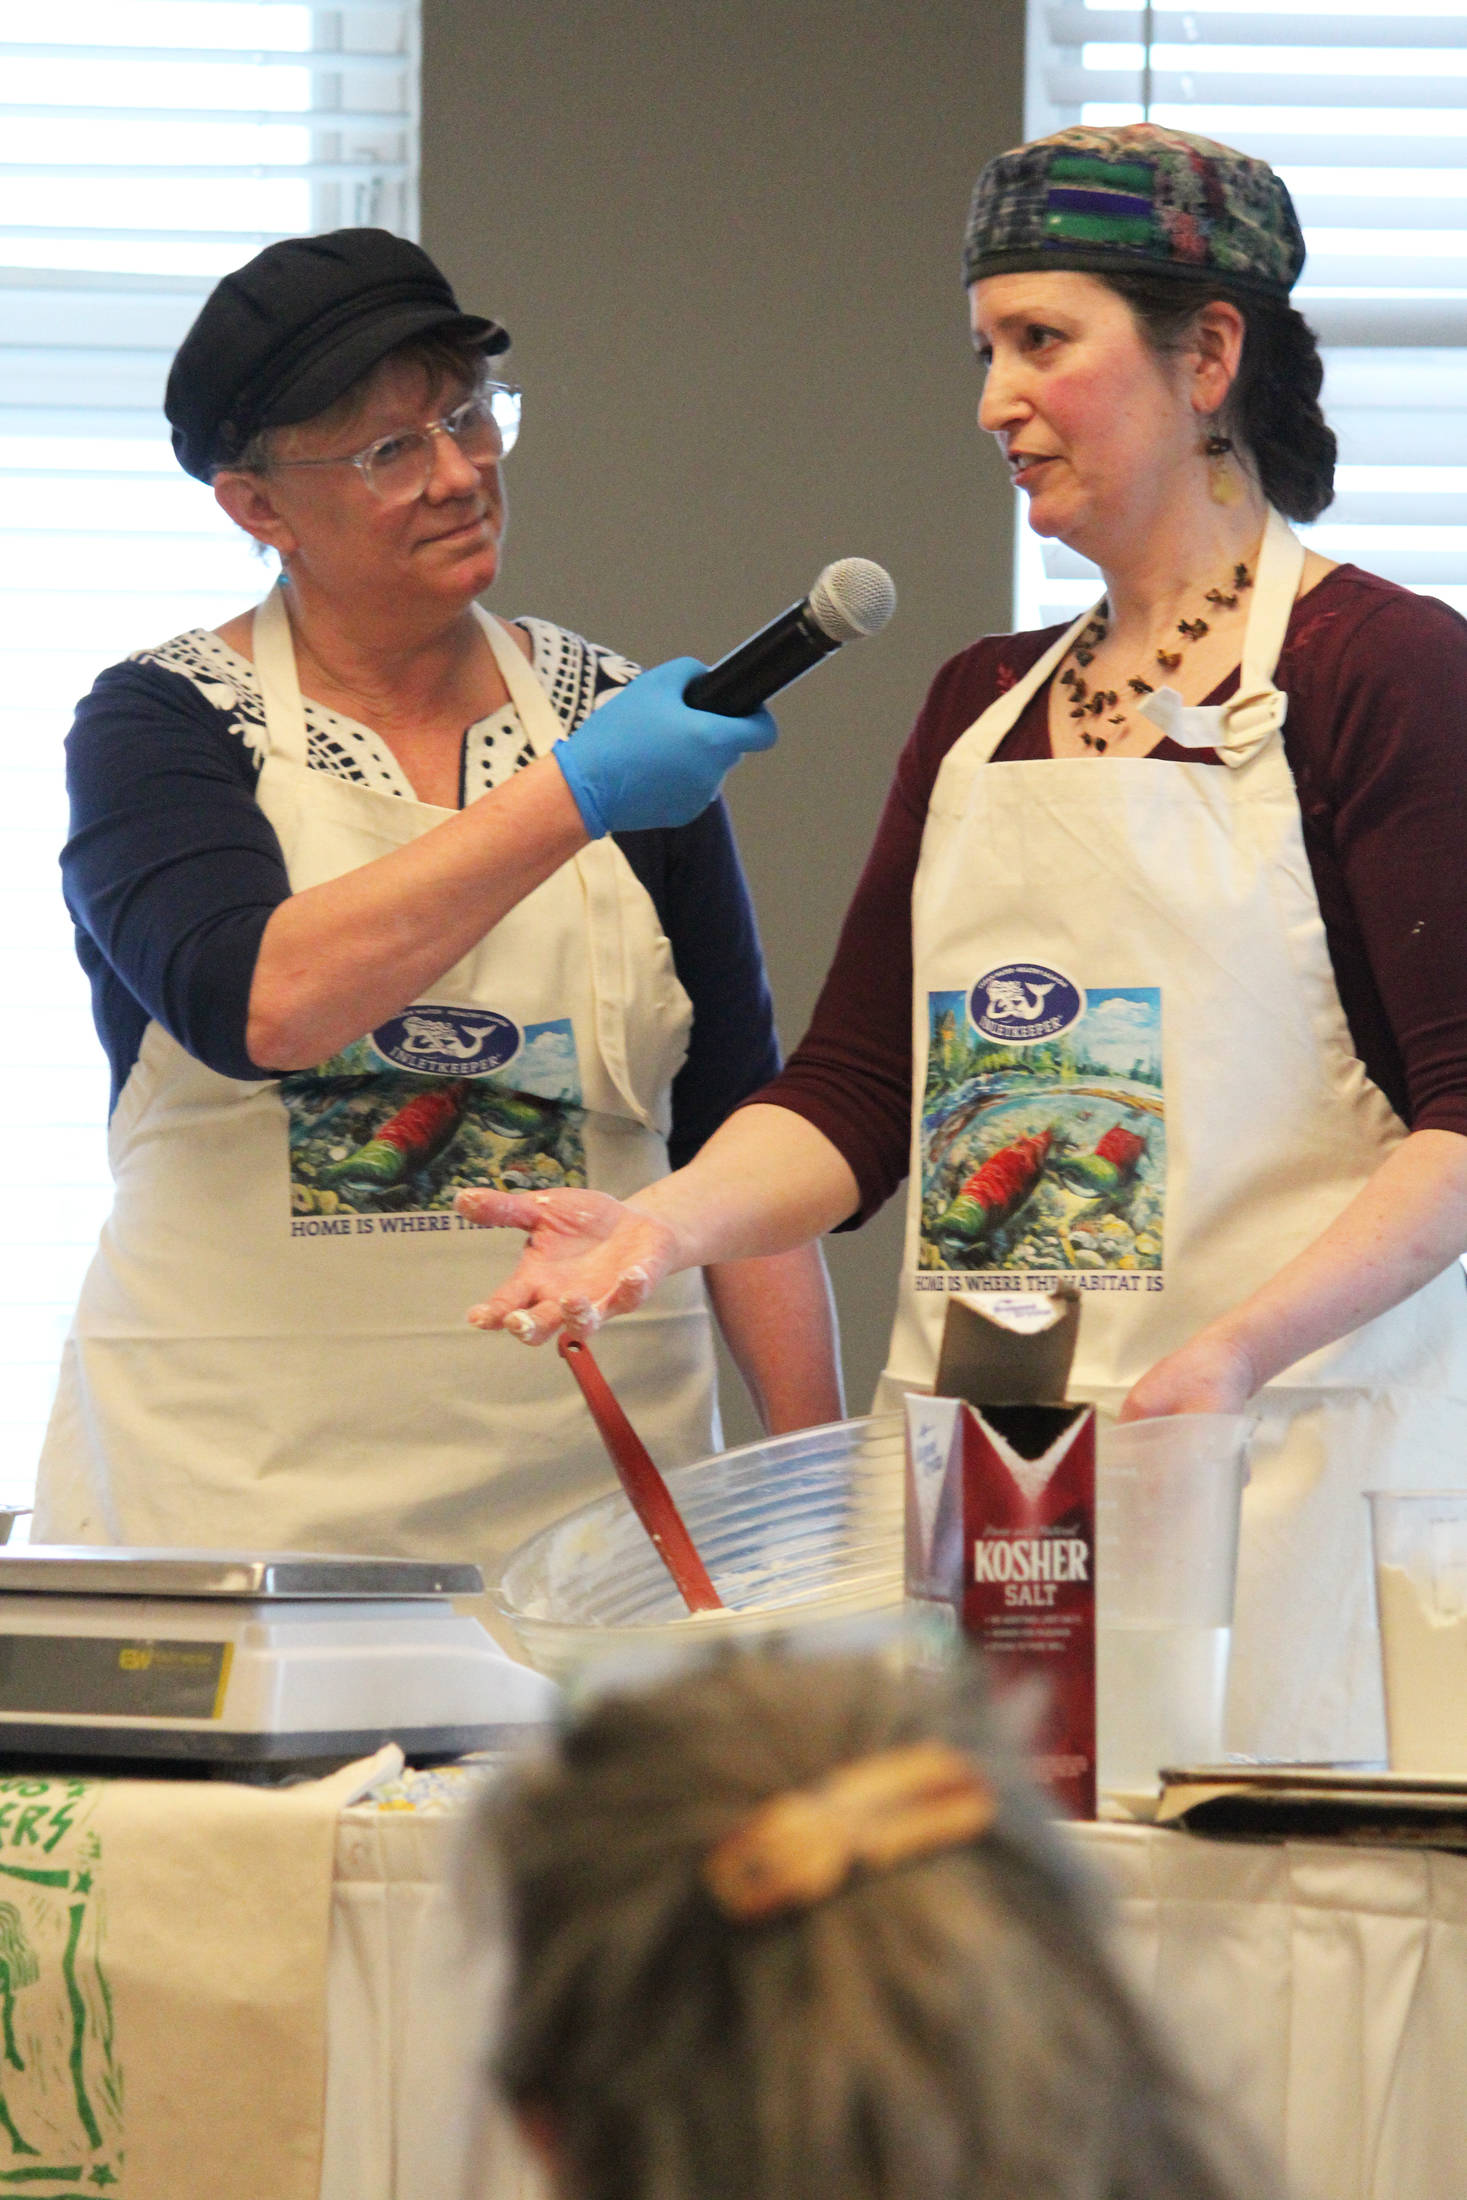 Carri Thurman, left, and Sharon Roufa, right, present a cooking demo on baking with sourdough Saturday, March 9, 2019 at the Alaska Food Festival at Land’s End Resort in Homer, Alaska. (Photo by Megan Pacer/Homer News)